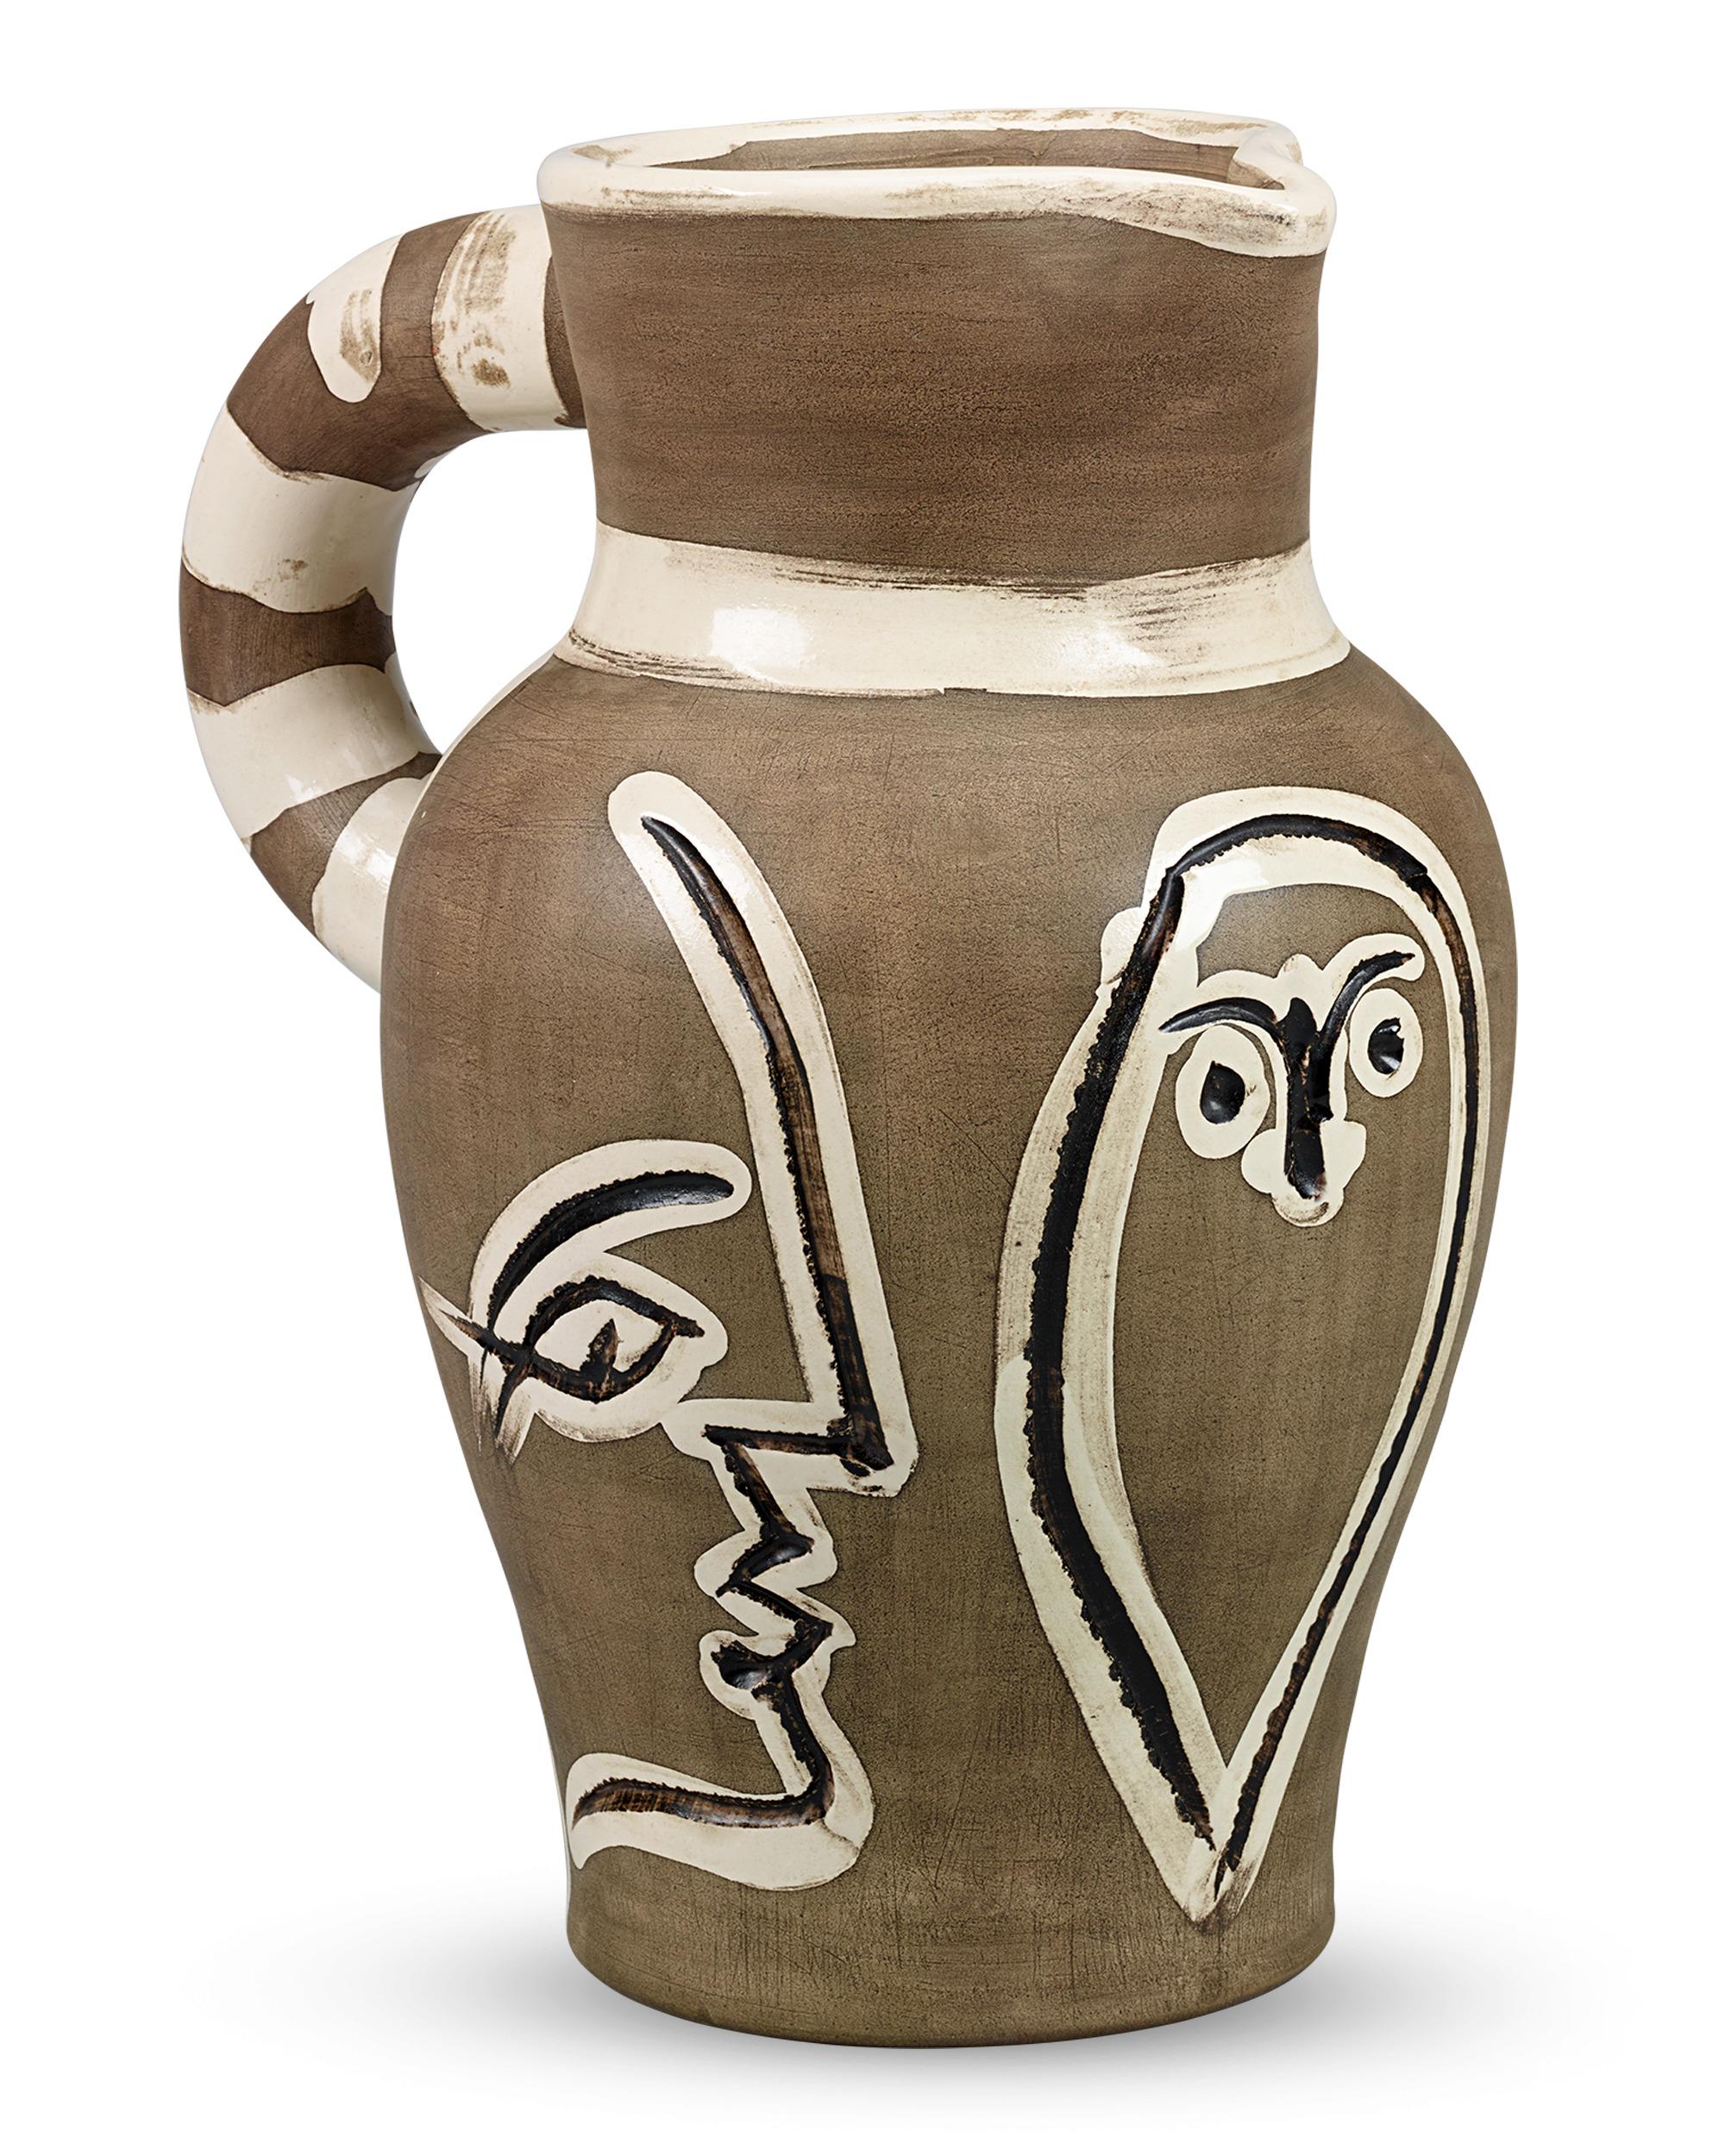 Pablo Picasso
1881-1973  Spanish

Pitcher

Earthenware ceramic and paint

This important clay pitcher created by the highly celebrated master Pablo Picasso in 1954 is a rare ceramic artwork in his oeuvre. The pitcher stands as a testament to the